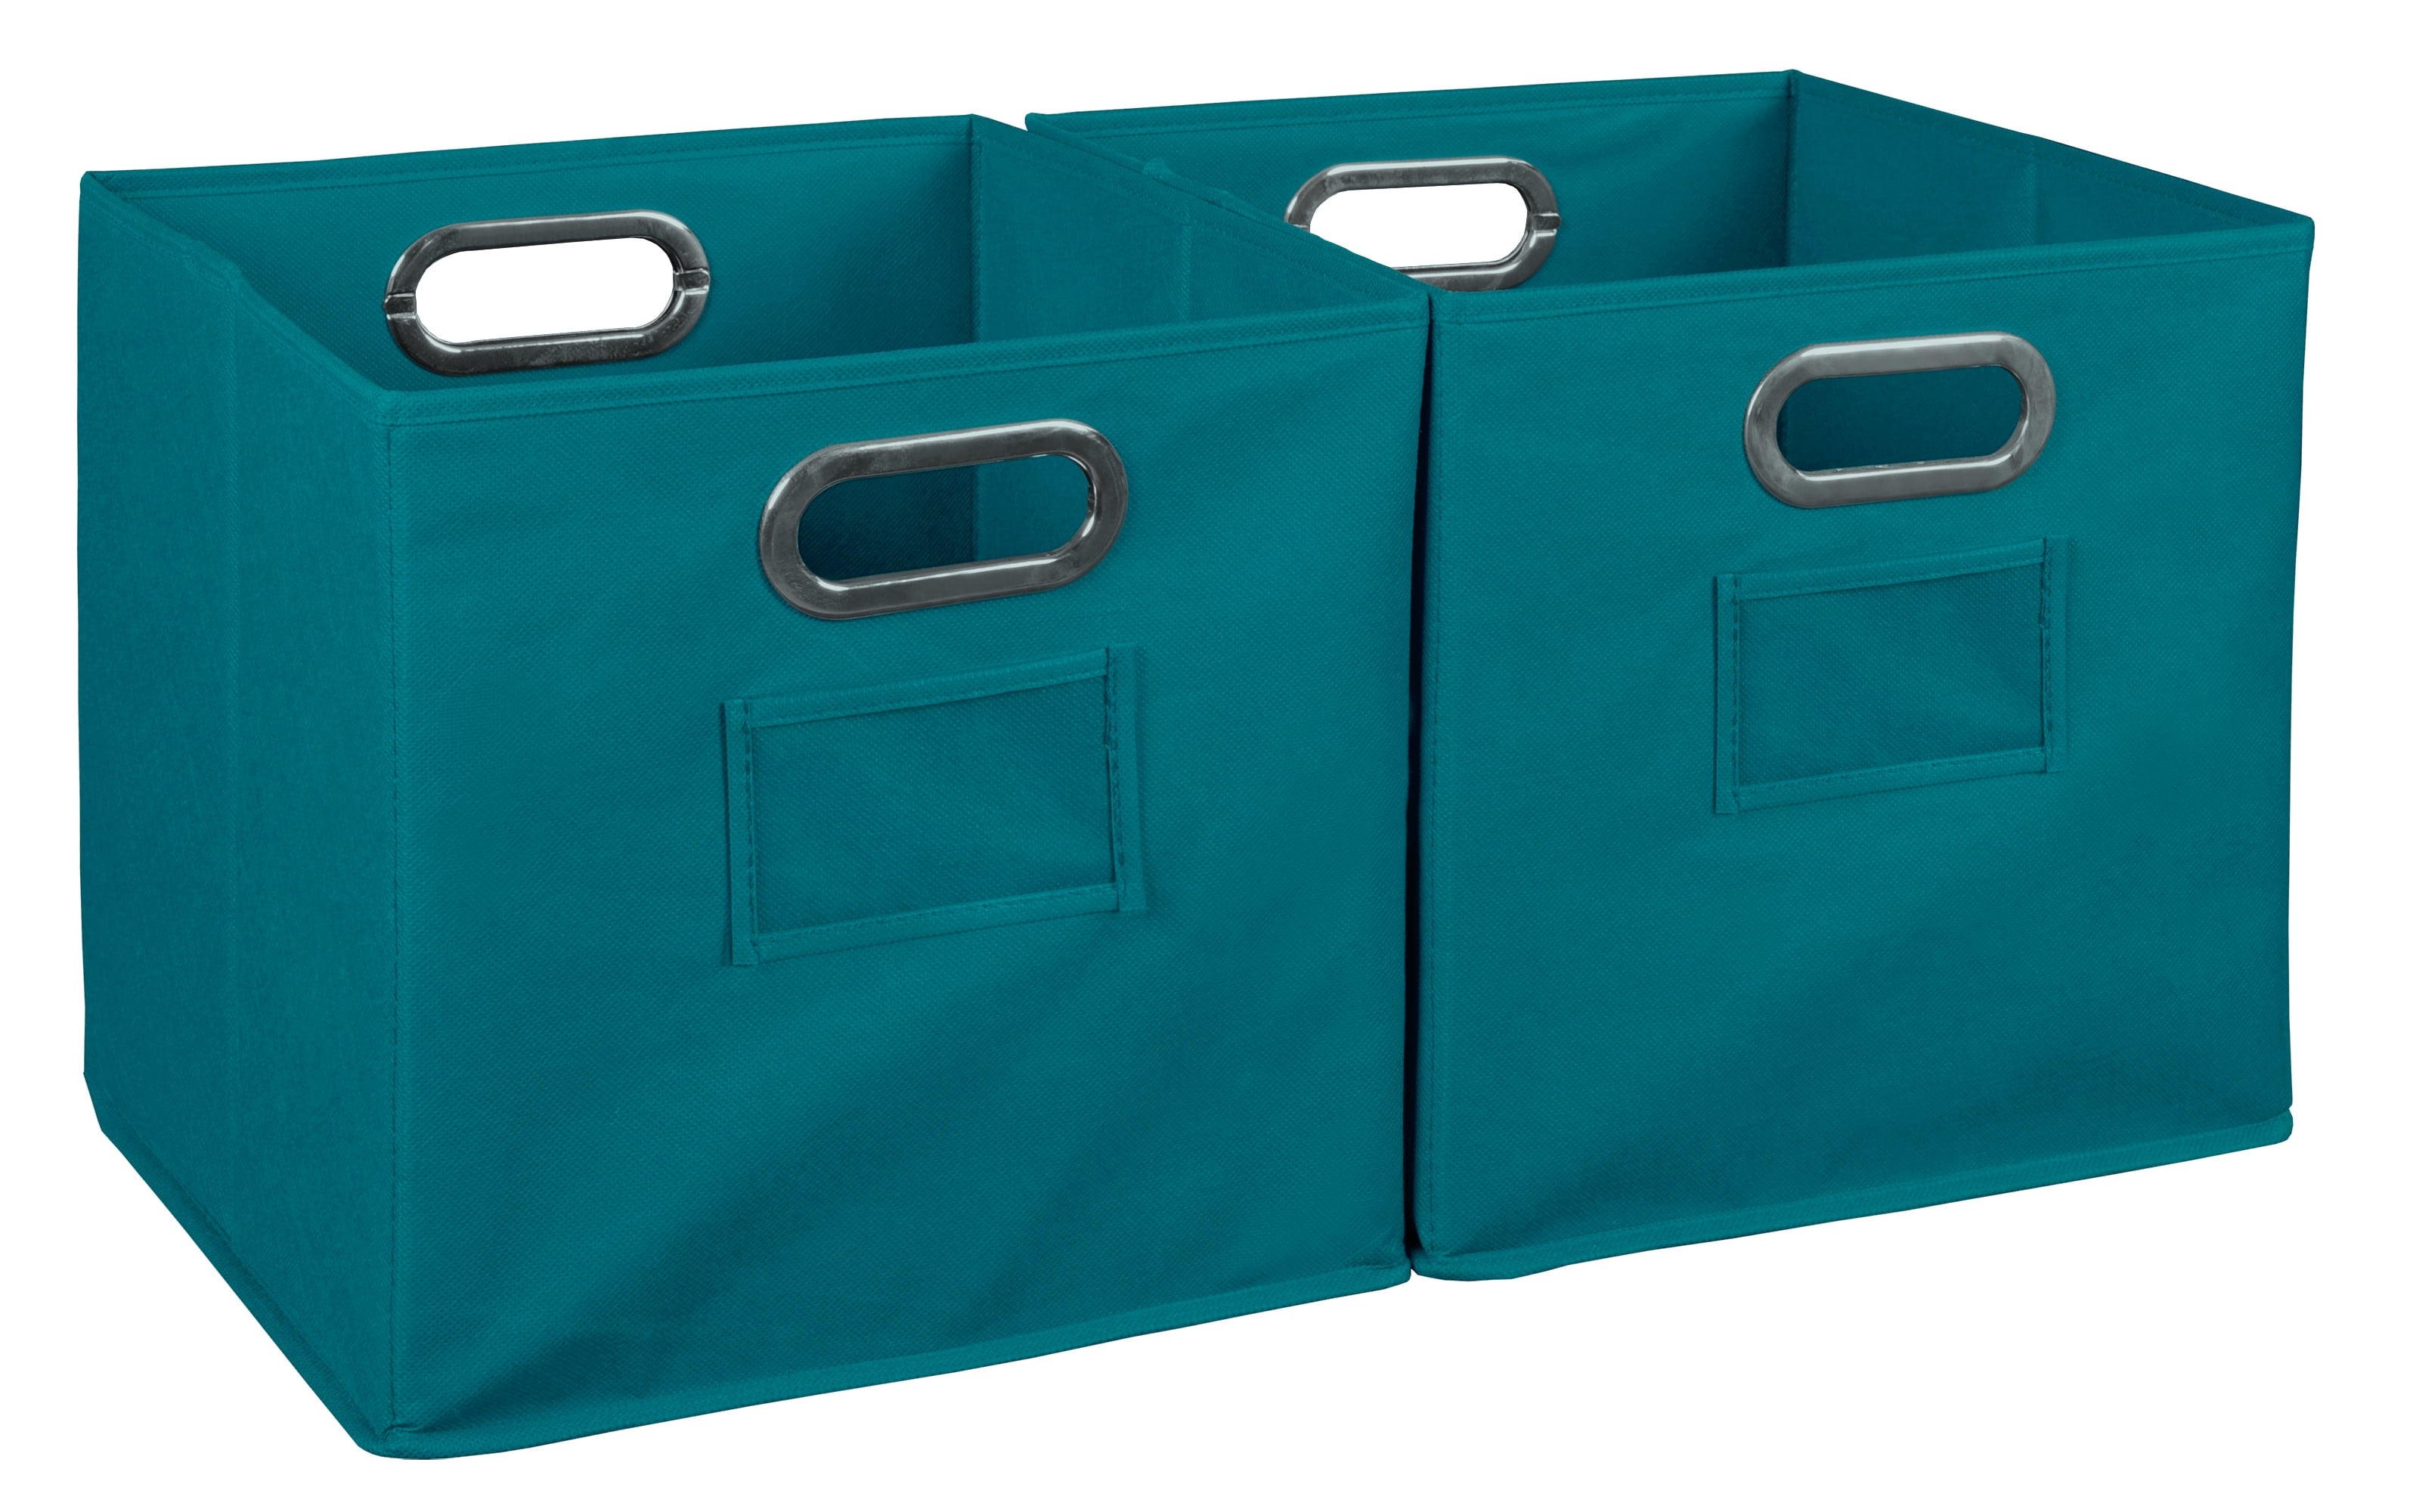 Collapsible Home Storage Set of 2 Foldable Fabric Storage Bins- Teal